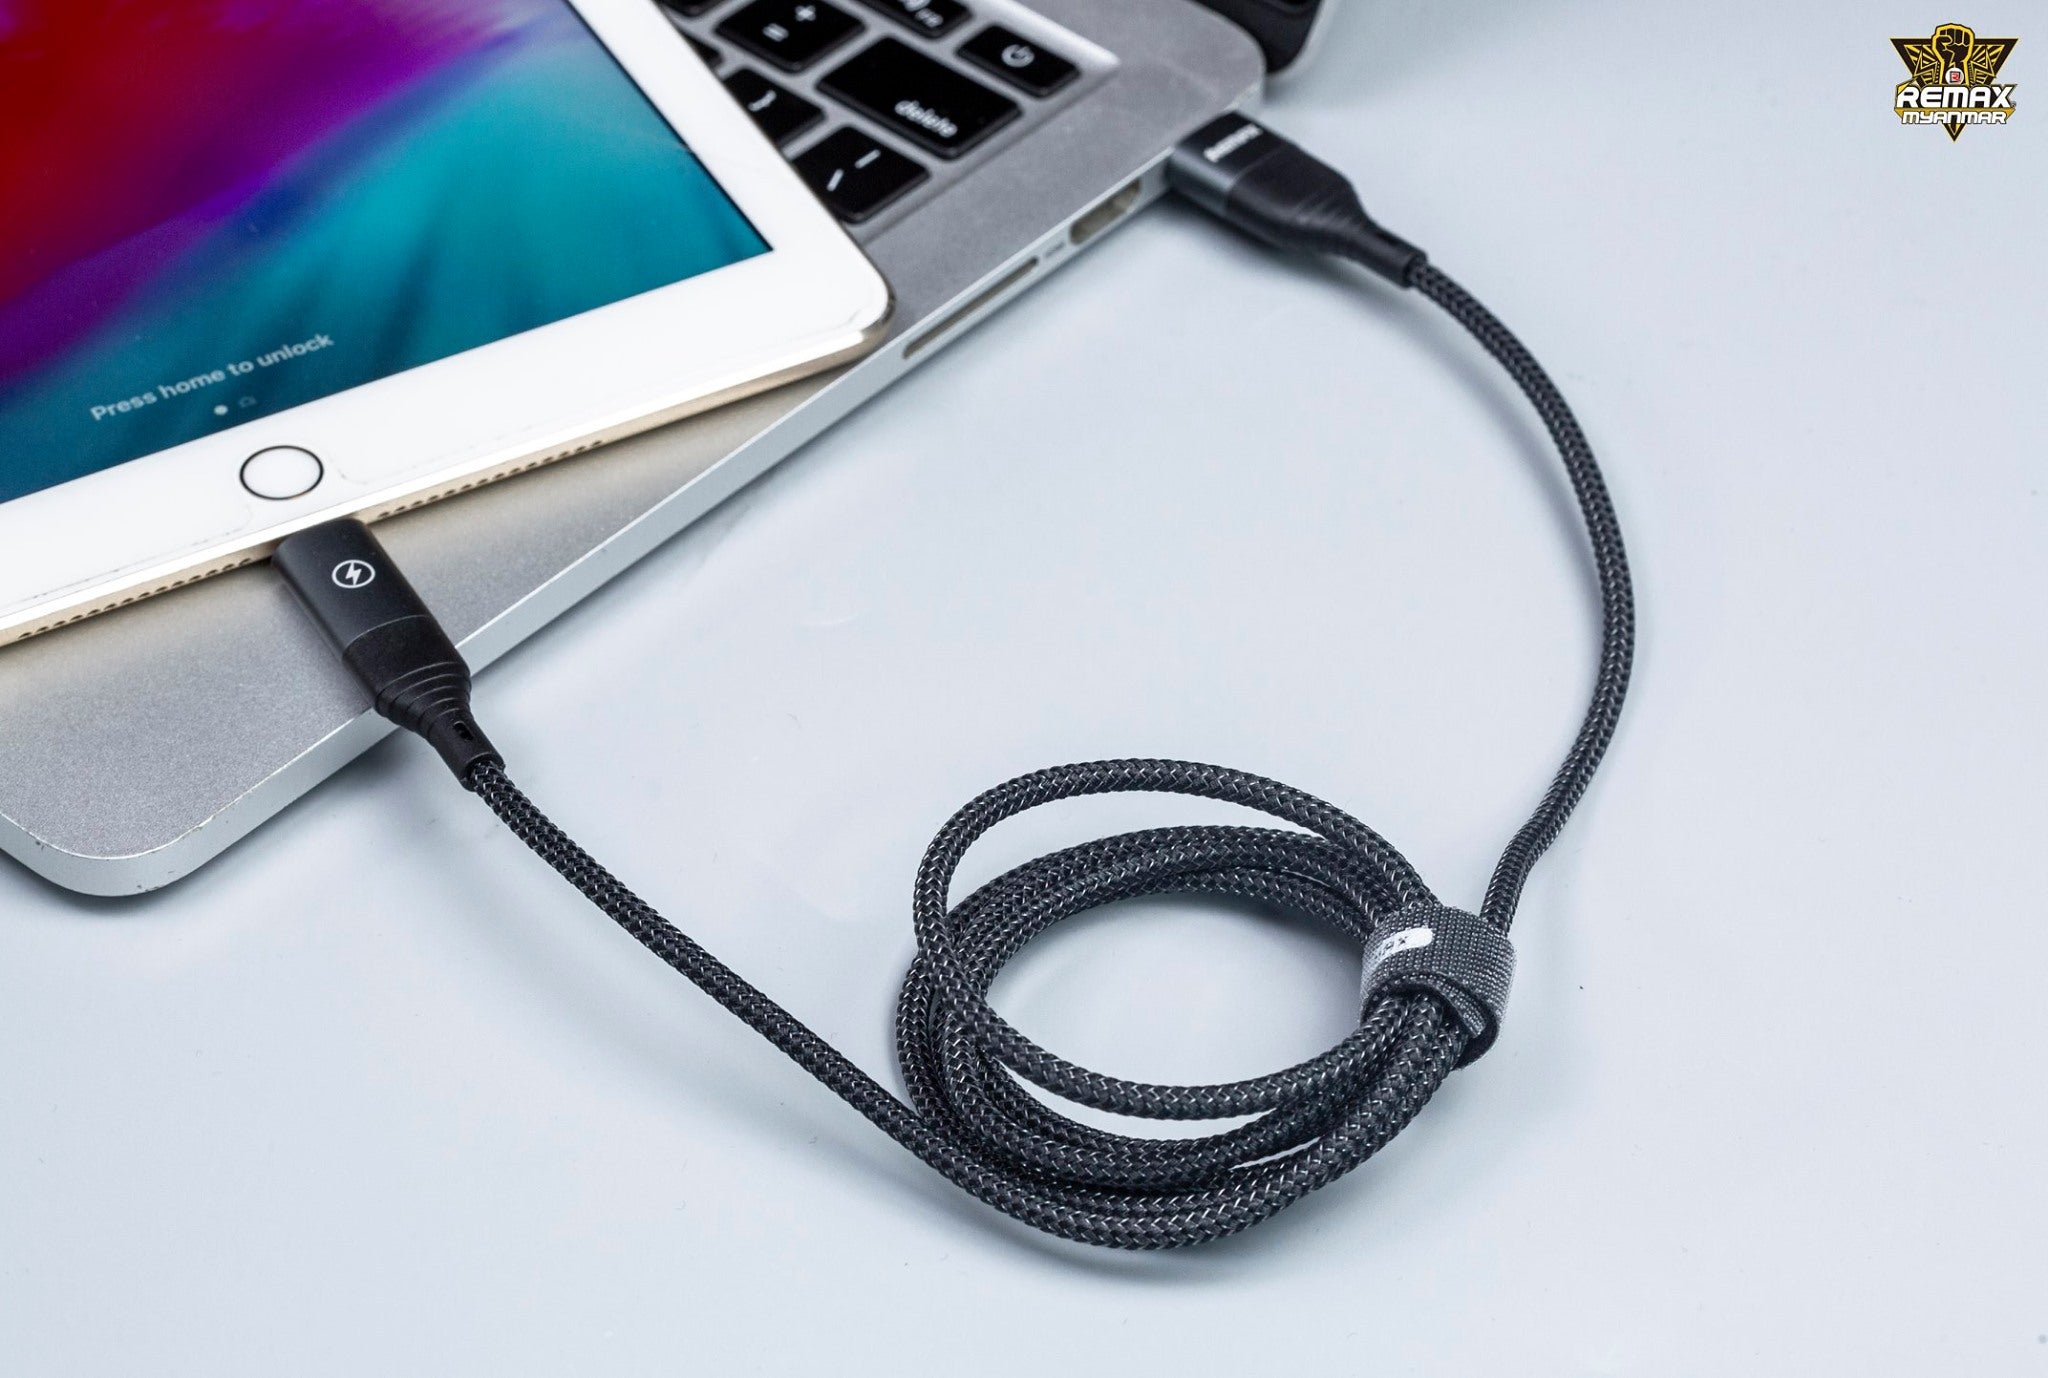 REMAX RC-011  SHARE SERIES 4 IN 1 CHARGING CABLE 1200MM (2.4A),Cable,4 in 1 cable,4 in 1 USB Cable,4 in 1 charging cable Phone Charging Cable,4 in 1 cable for mobile phone,smart phone,tablet,iPhone,iPad,4 in 1 USB Charging Cable